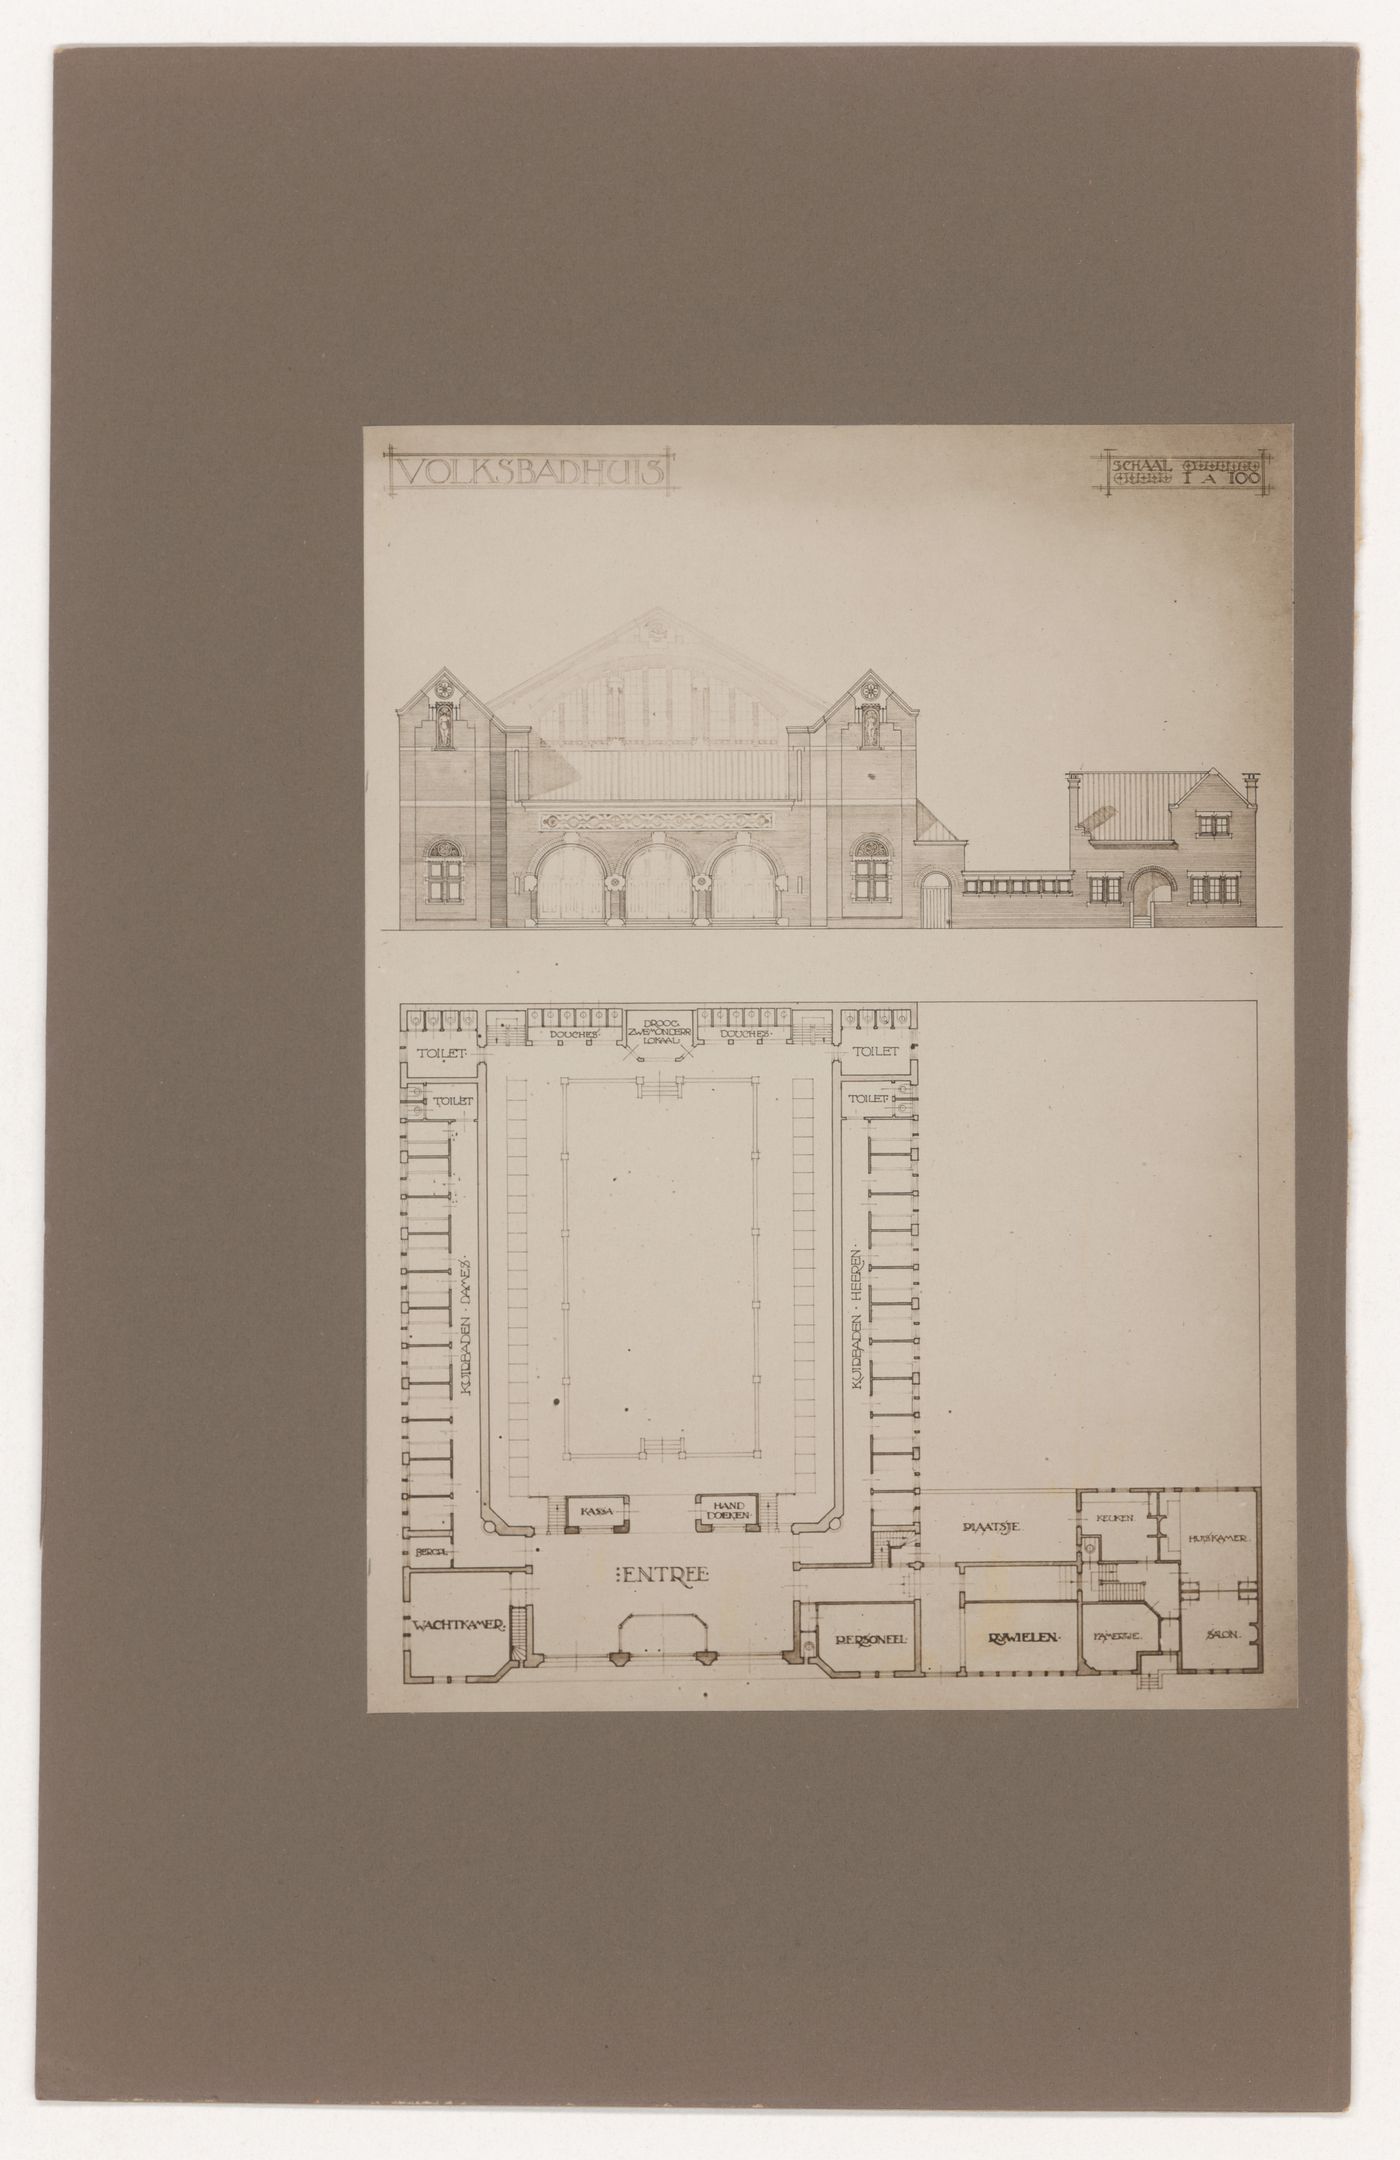 Photograph of an elevation and ground plans for a public bath, Blaricum, Netherlands